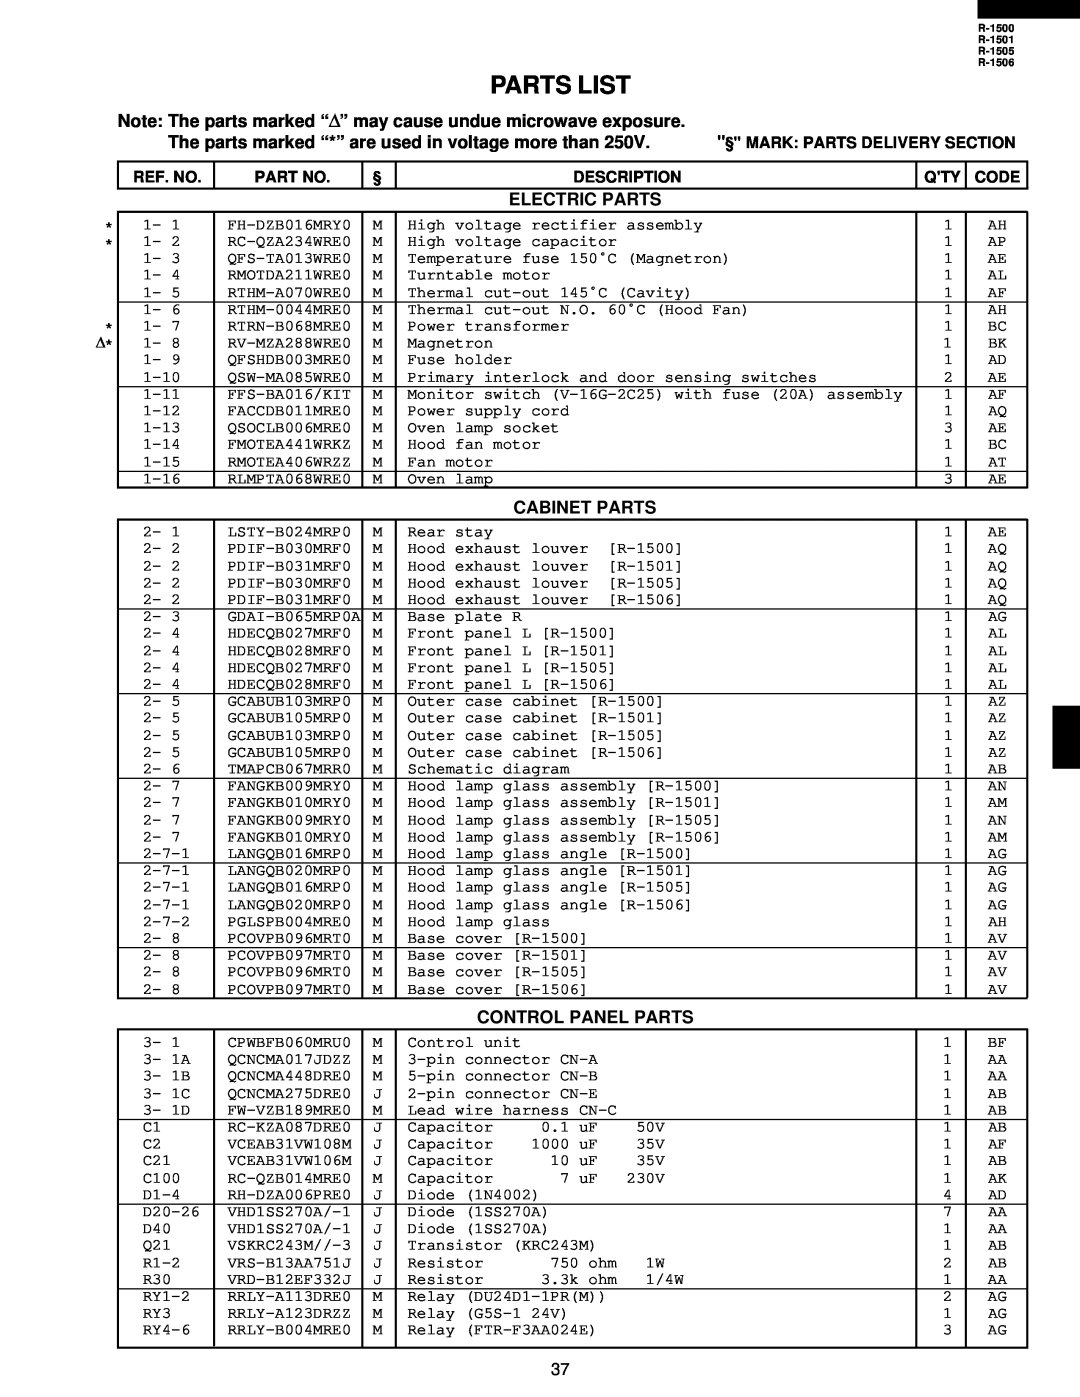 Sharp R-1506 Parts List, Note The parts marked “∆ ” may cause undue microwave exposure, Electric Parts, Cabinet Parts 